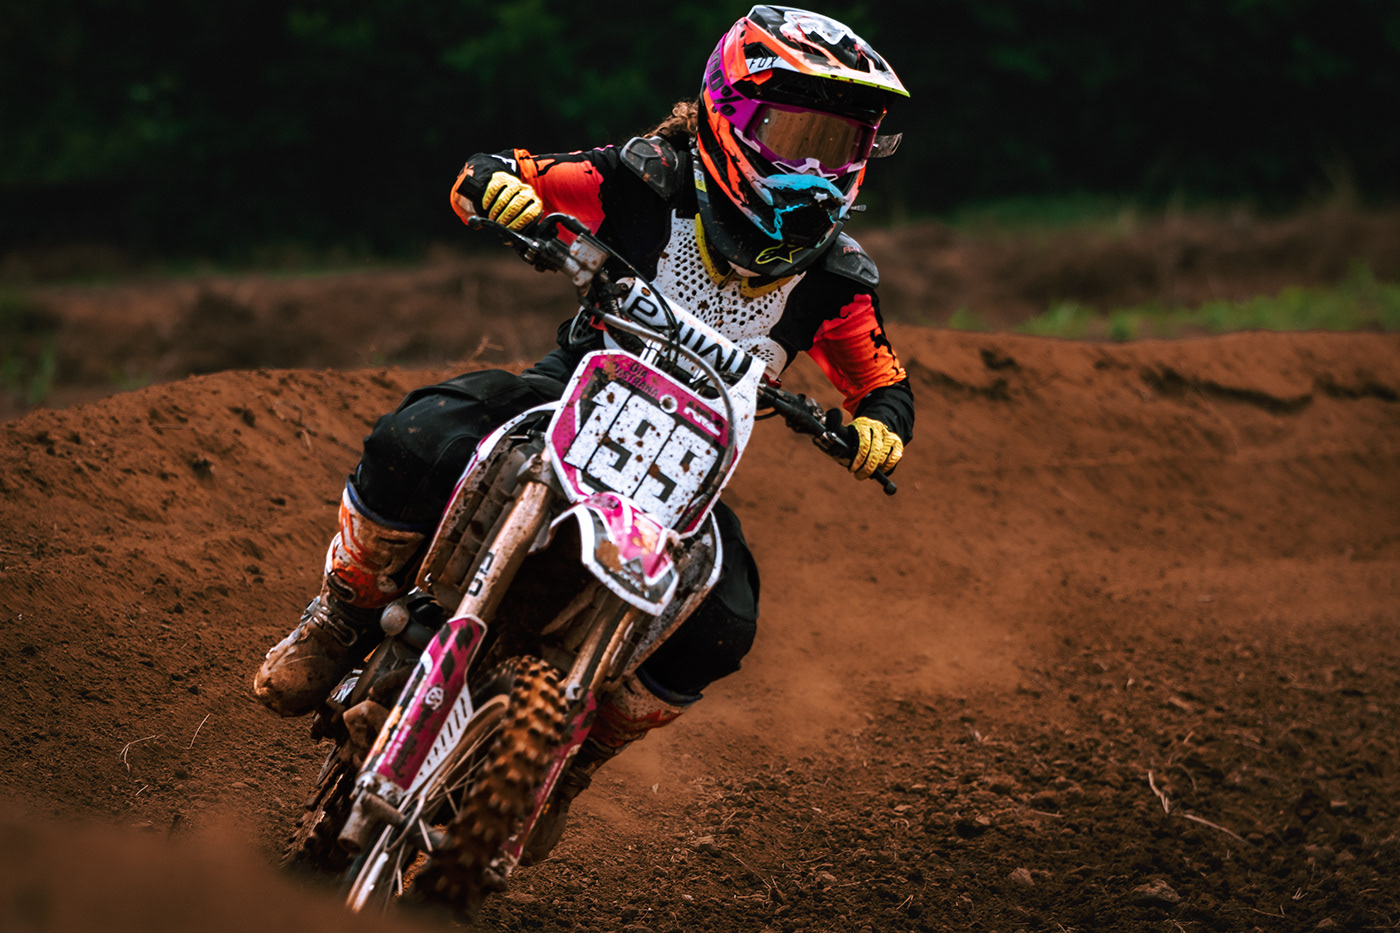 action sports dirtbike extreme sport Motocross Motorsport mx Photography  Racing sportphotography